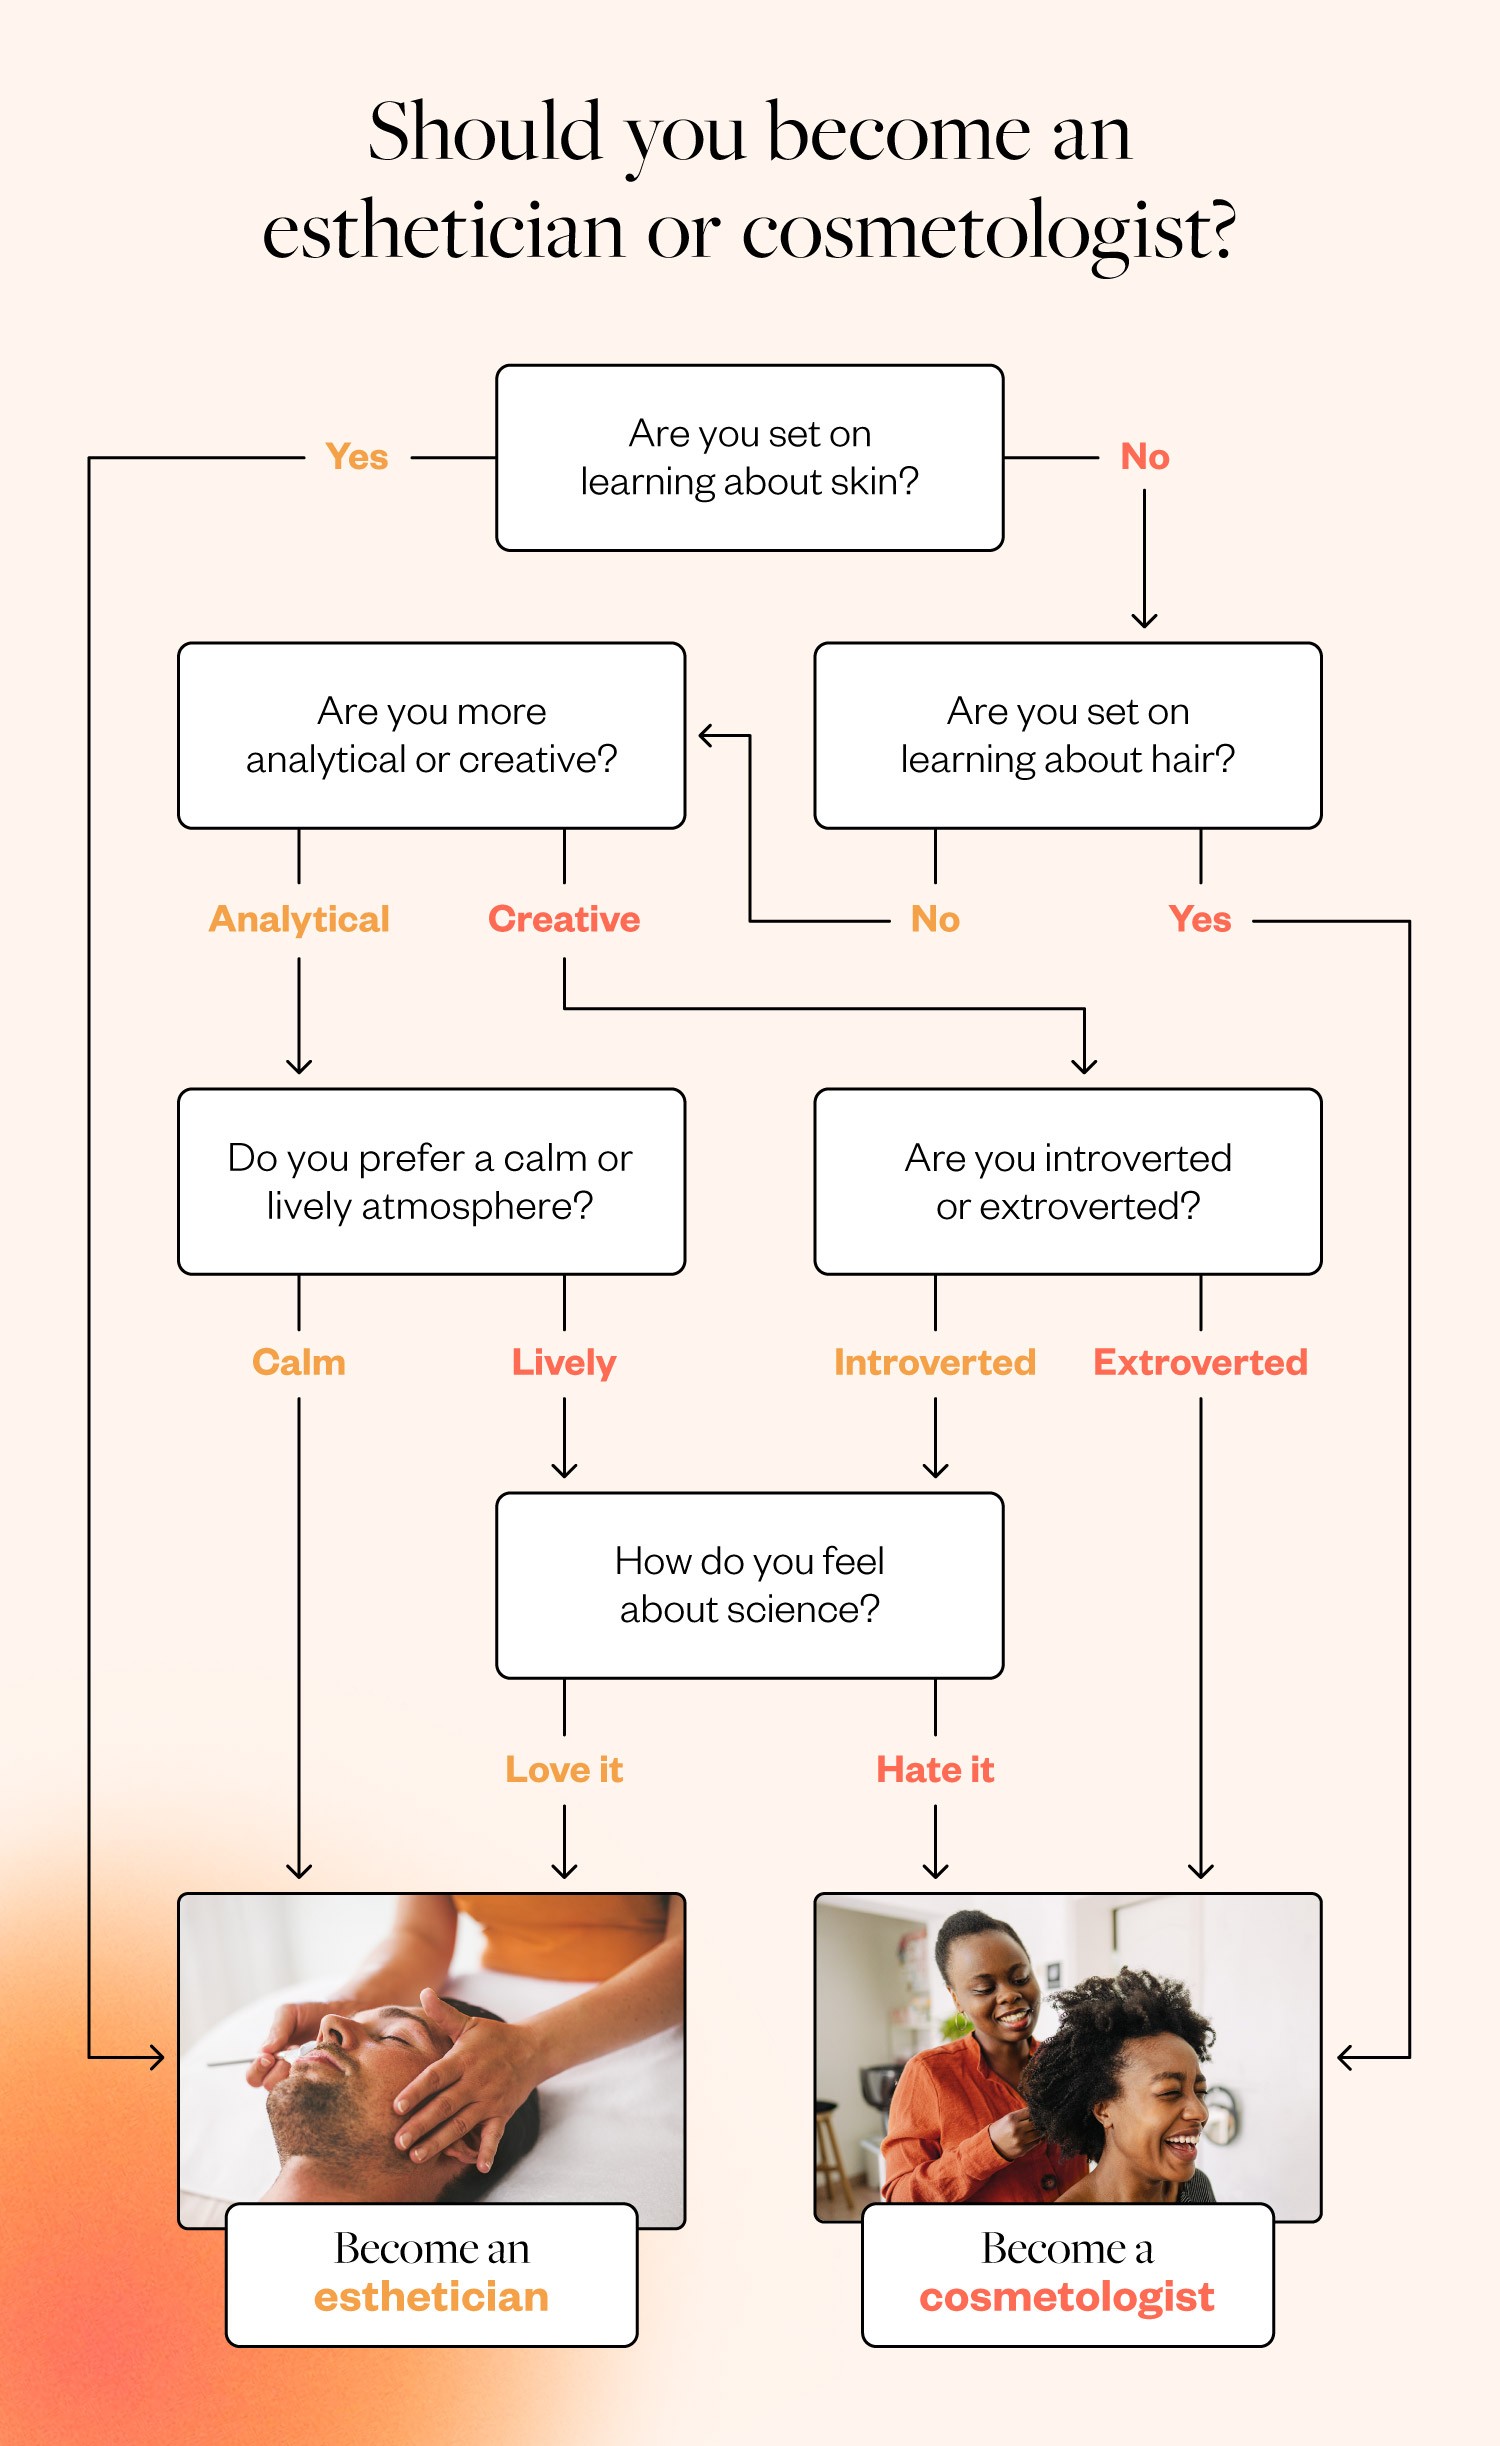 Should-you-become-an-esthetician-or-cosmetologist-flow-chart